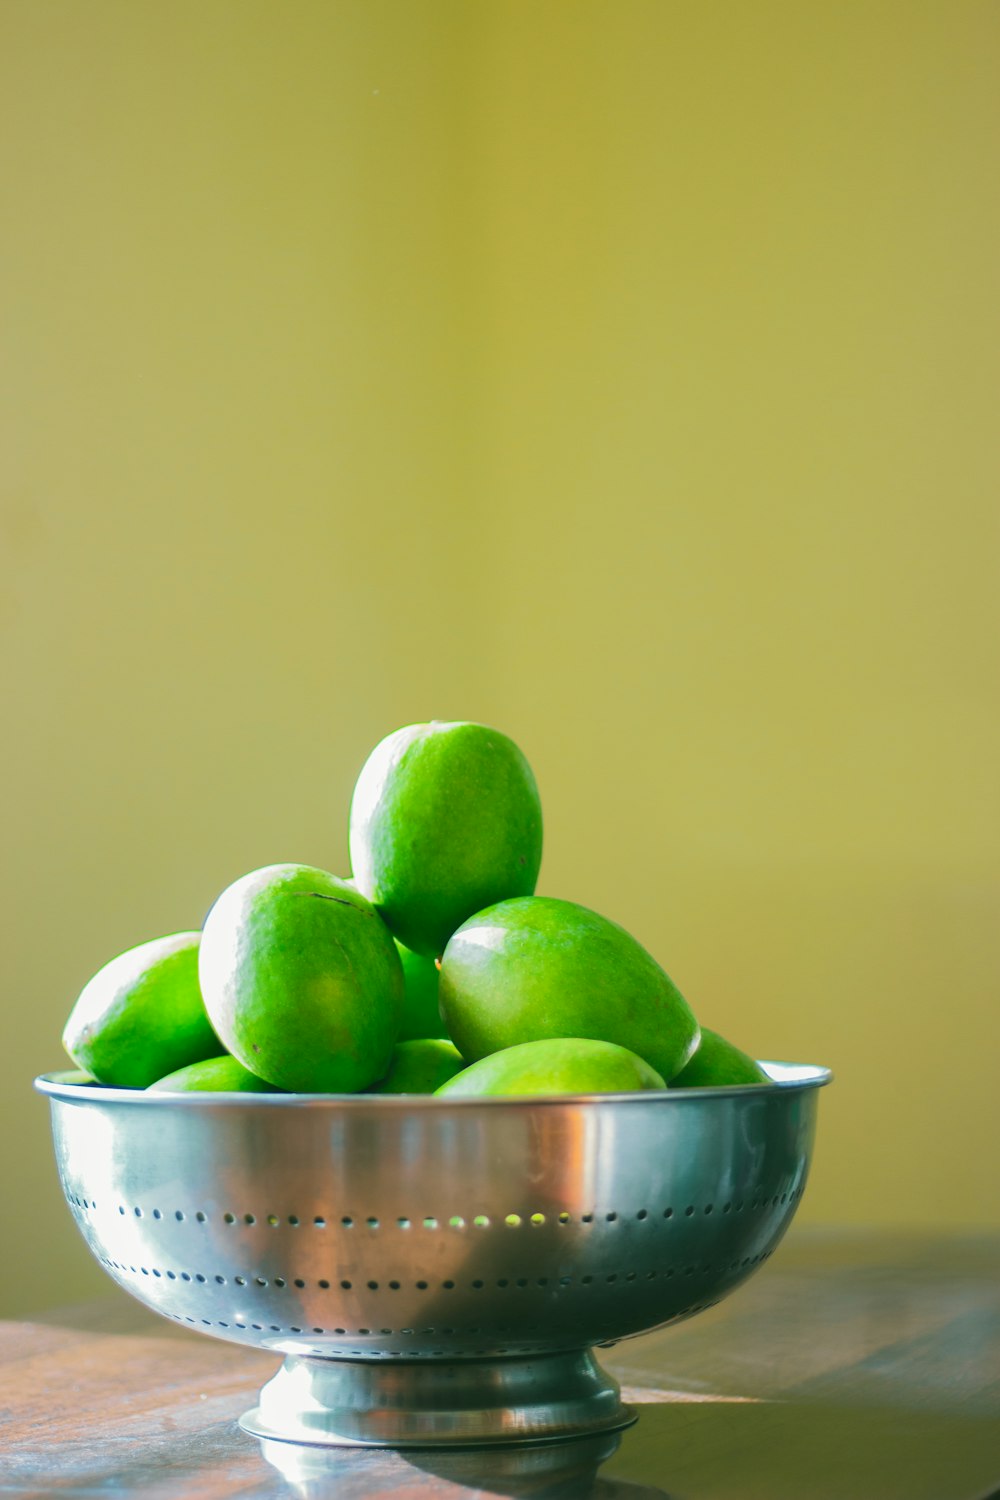 green and yellow apples in white ceramic bowl